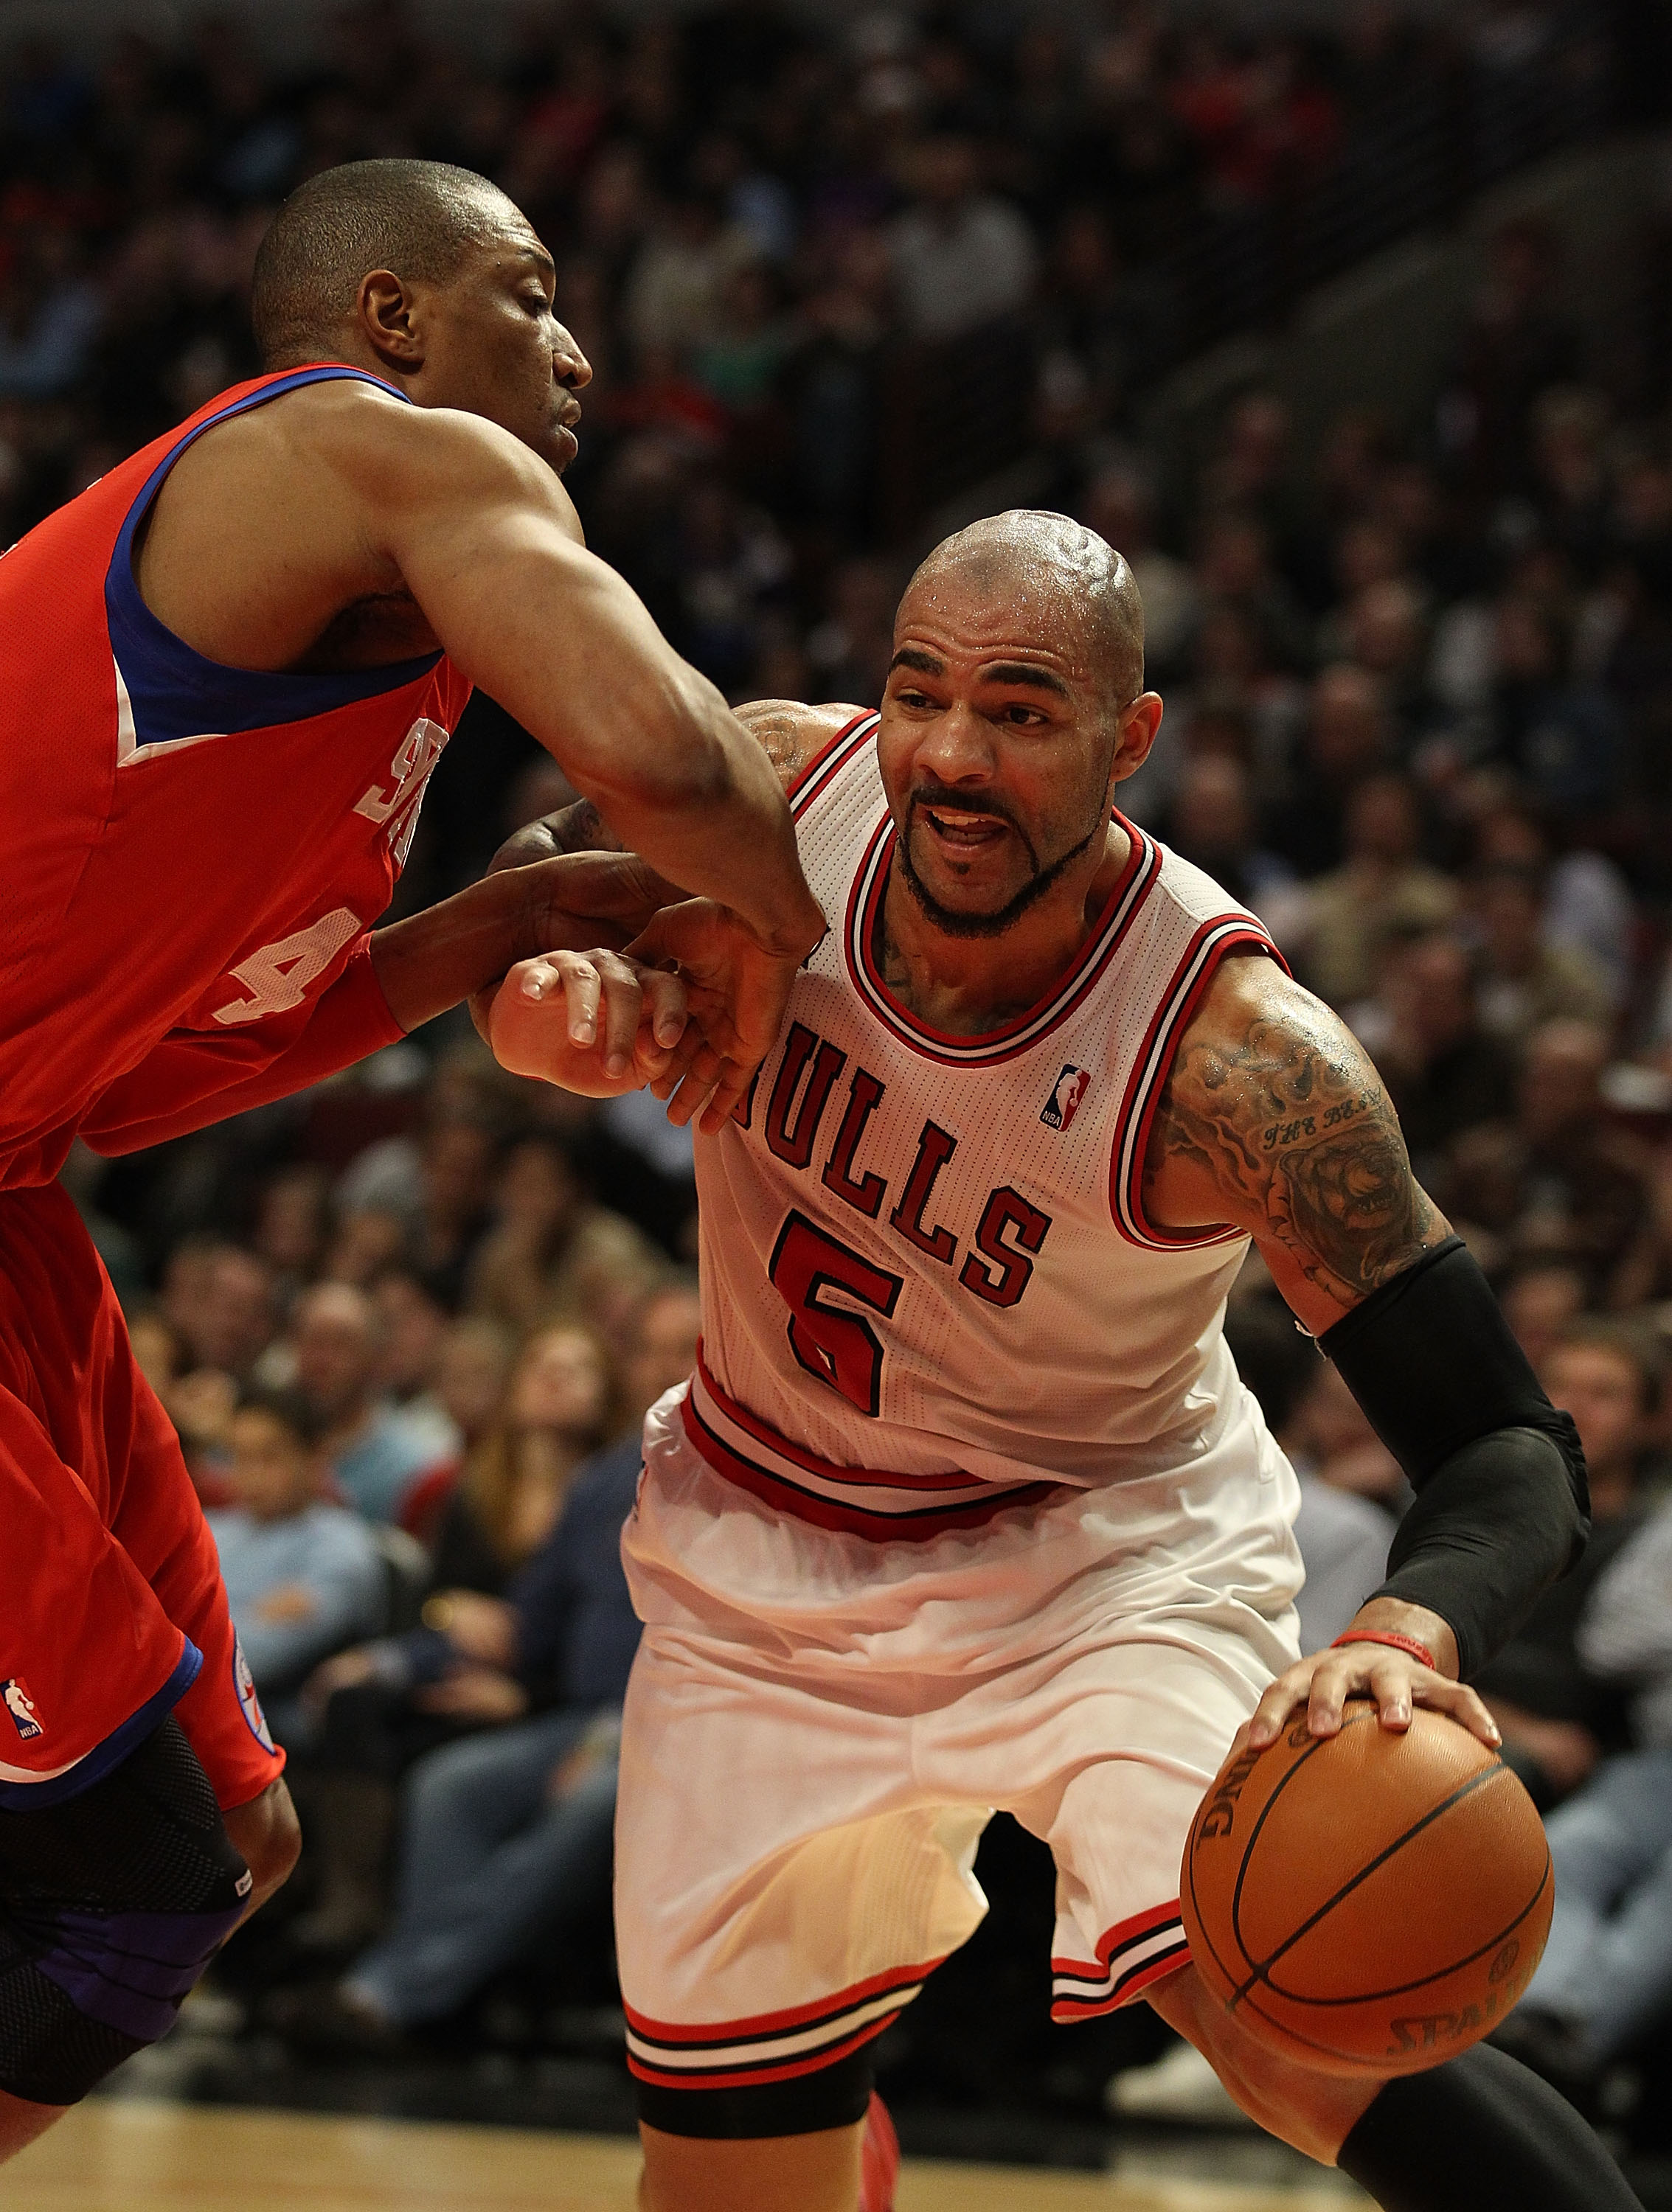 CHICAGO, IL - DECEMBER 21: Carlos Boozer #5 of the Chicago Bulls drives against Tony Battie #4 of the Philadelphia 76ers at the United Center on December 21, 2010 in Chicago, Illinois. The Bulls defeated the 76ers 121-76. NOTE TO USER: User expressly ackn